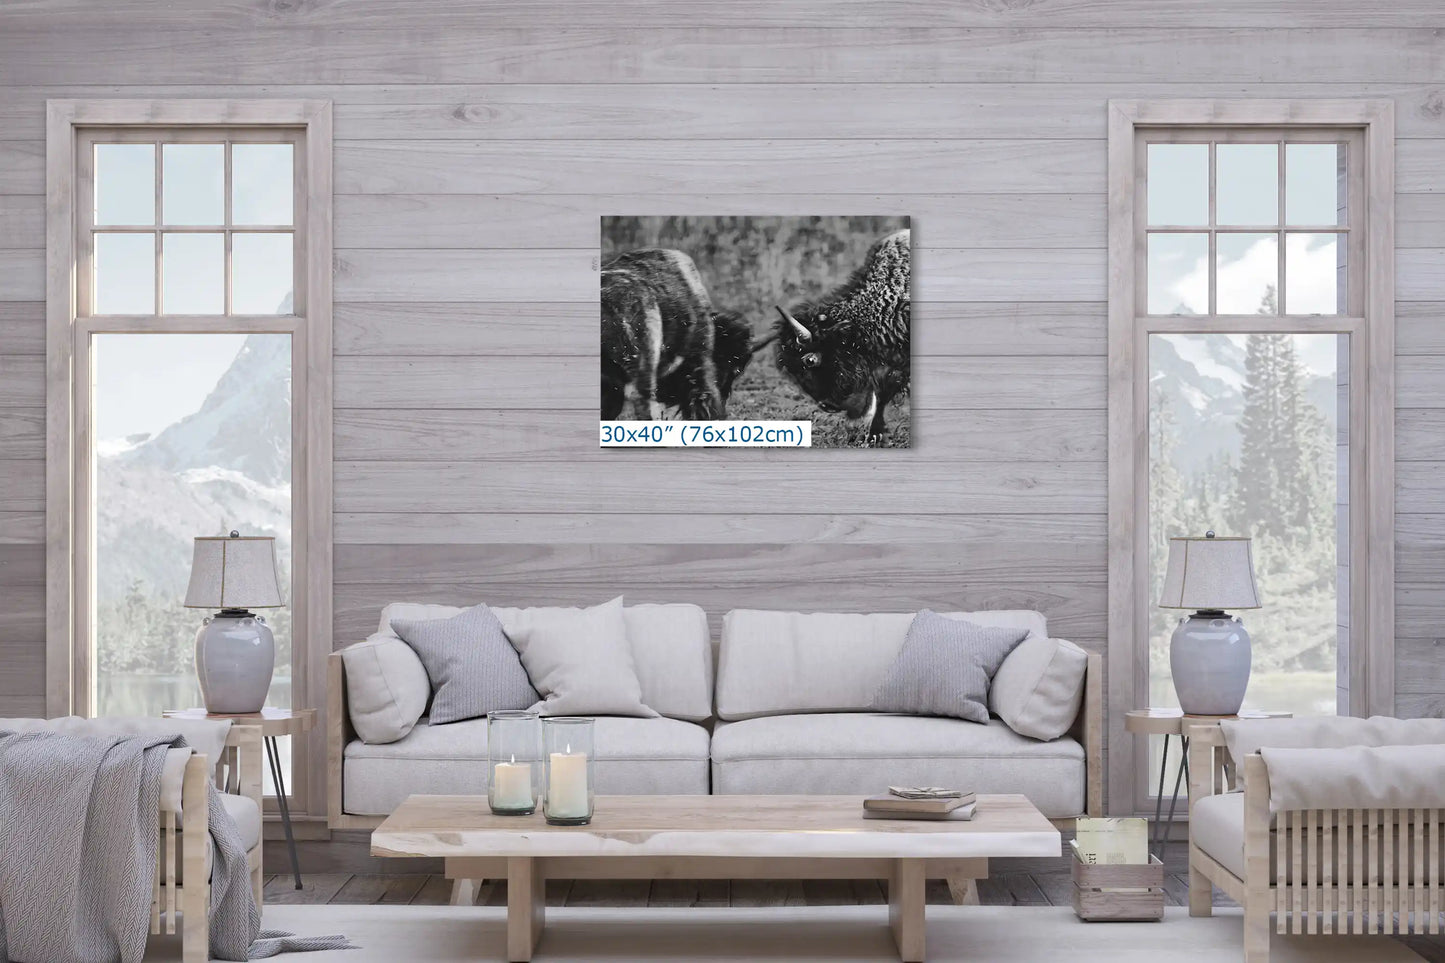 A 30x40 inch black and white canvas print of bison in combat, placed above a sofa in a cozy living room with a mountain view.